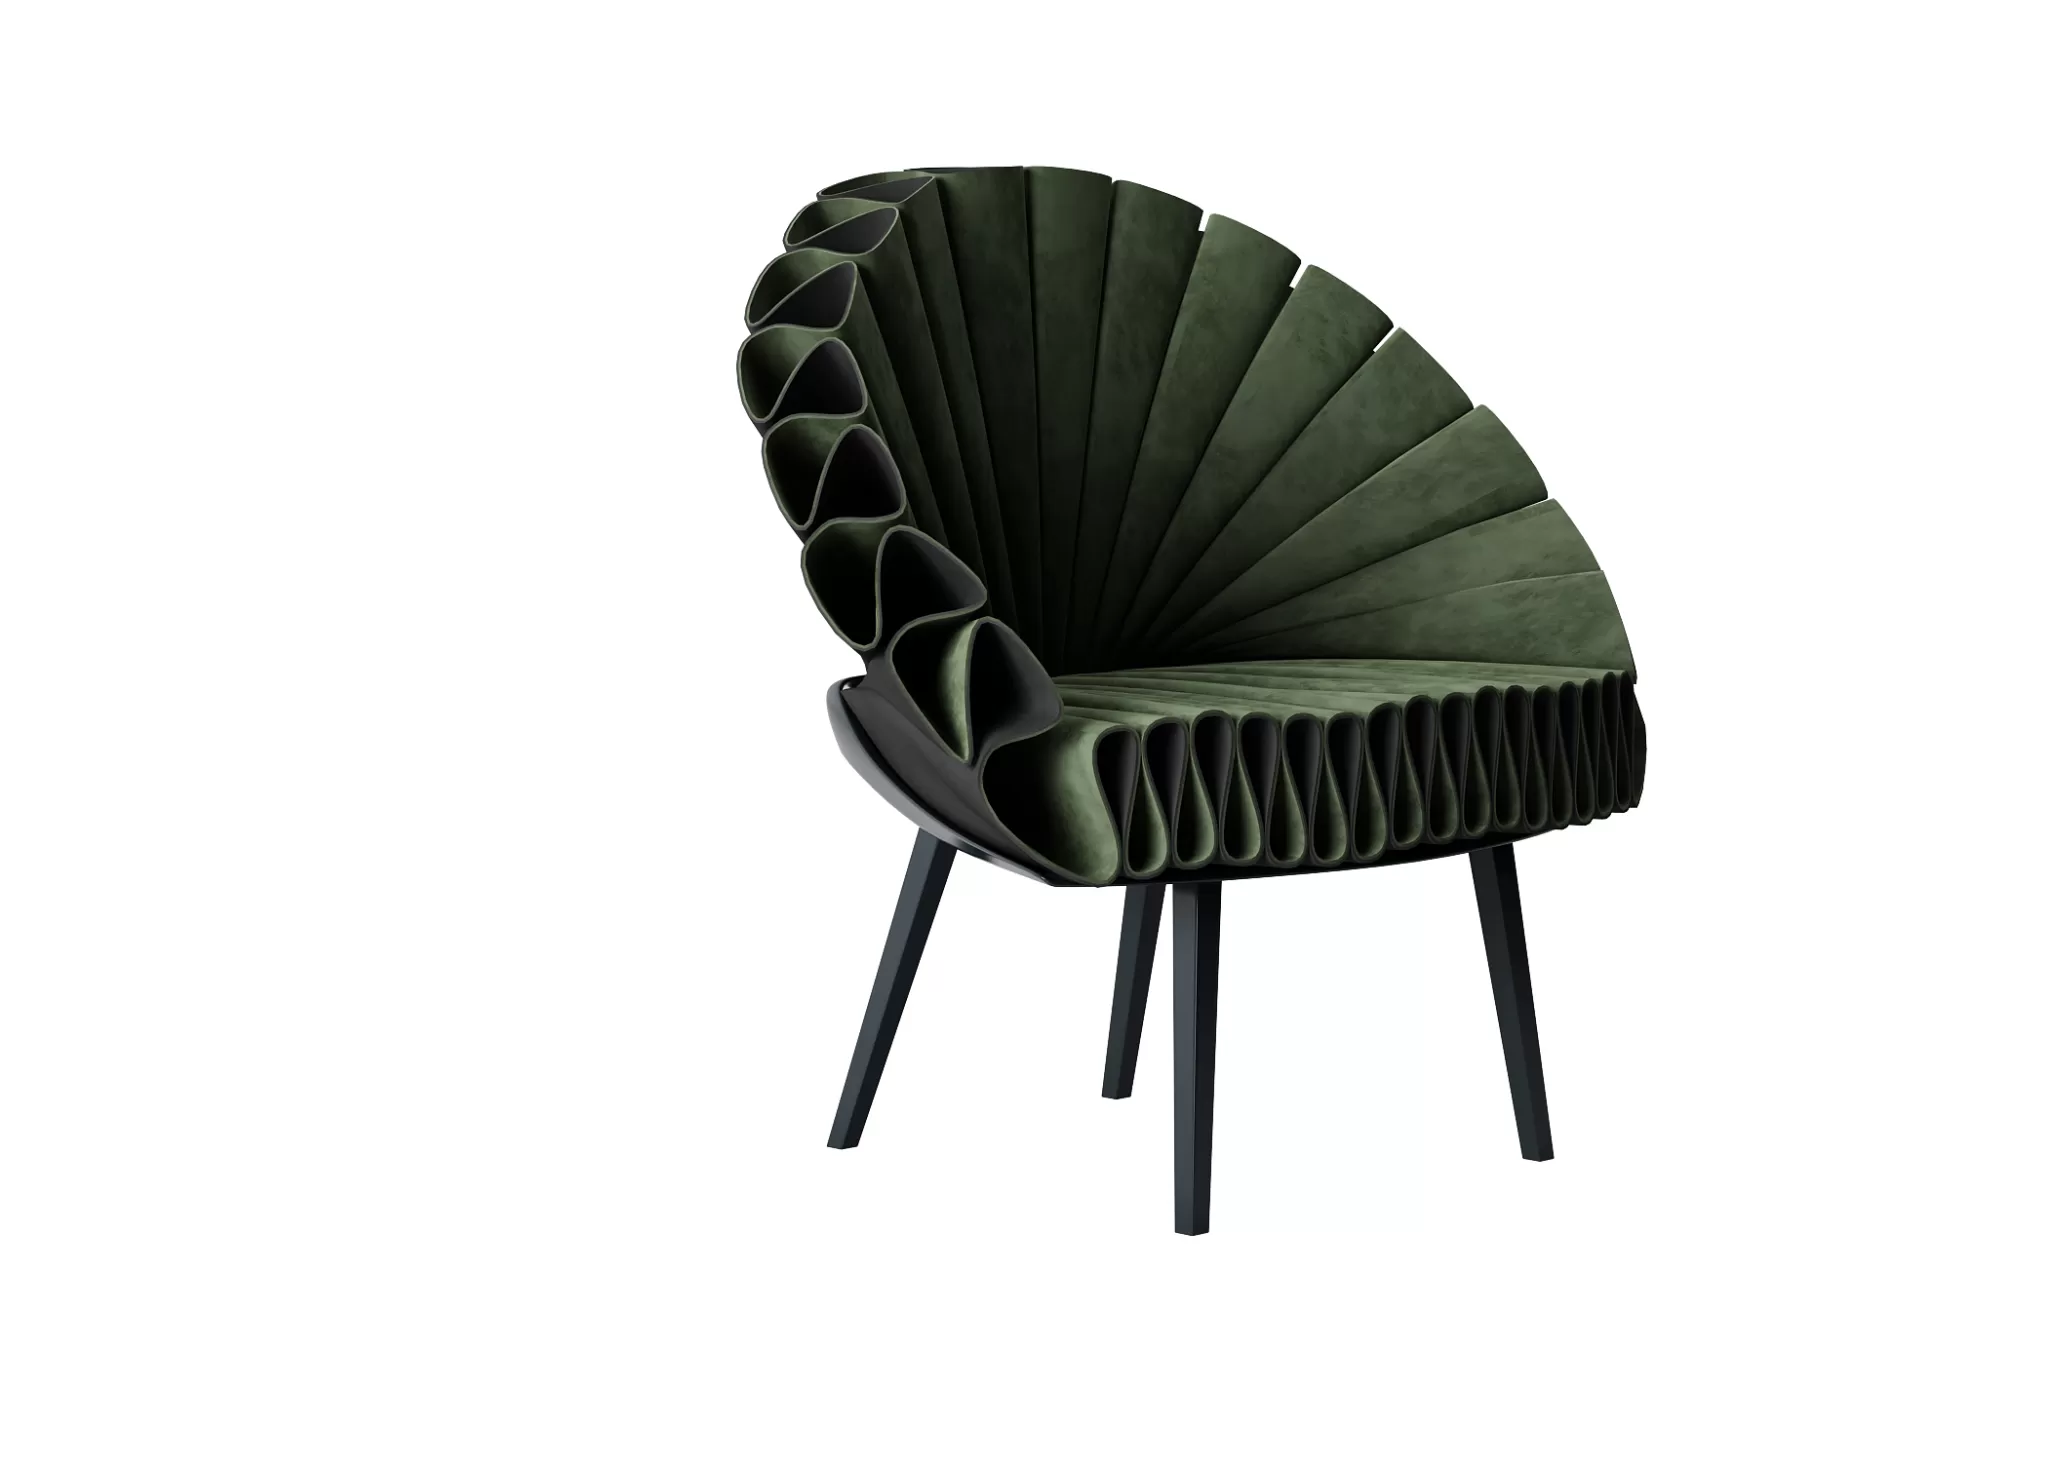 FURNITURE 3D MODELS – CHAIRS – 0081